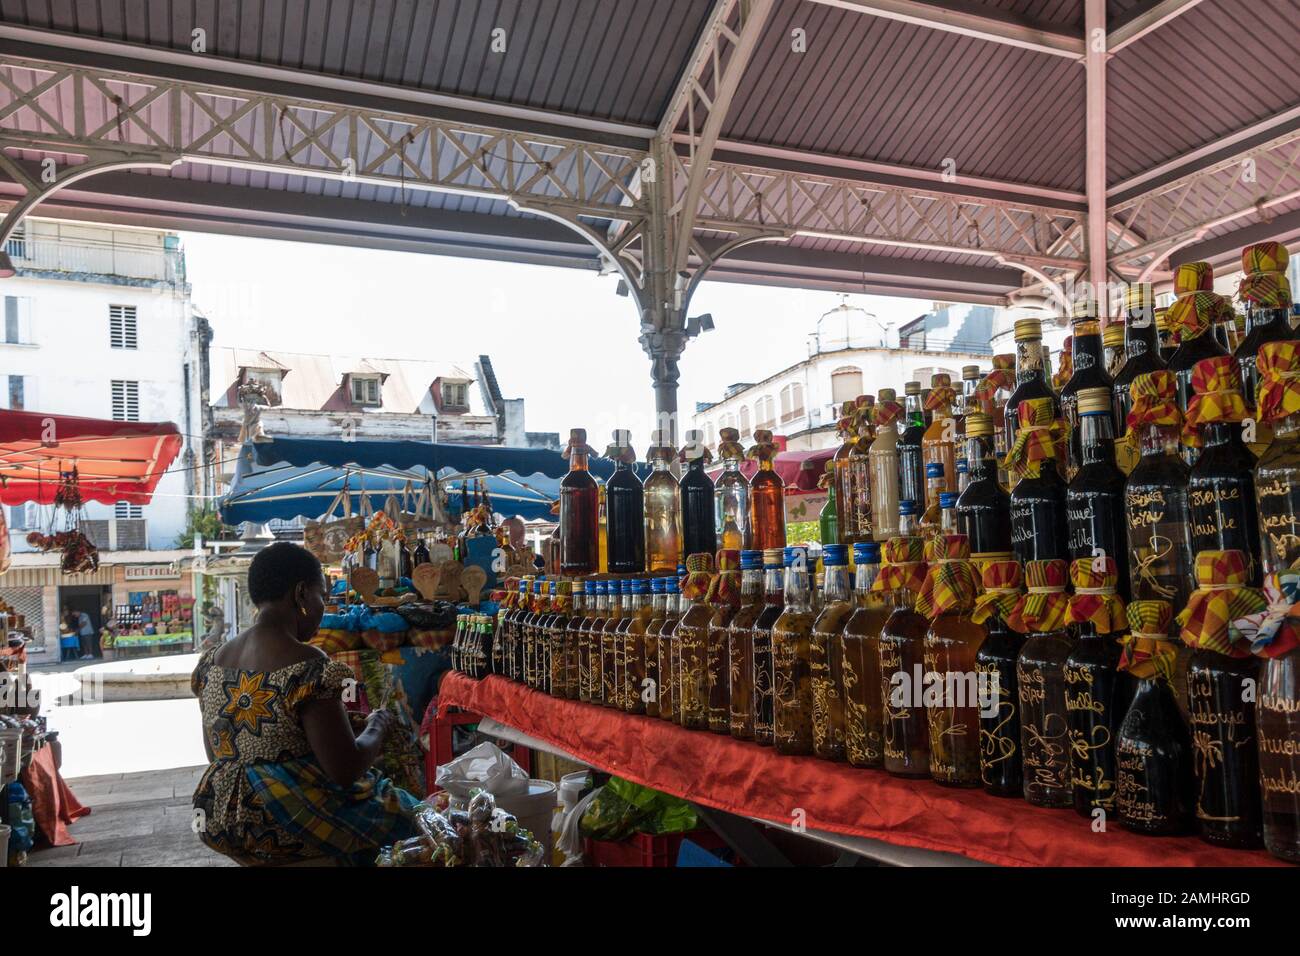 Stallholder with local crafts including wines, drinks, oils and spices at the Spice Market in Pointe-a-Pitre, Guadeloupe, West Indies, Caribbean Stock Photo